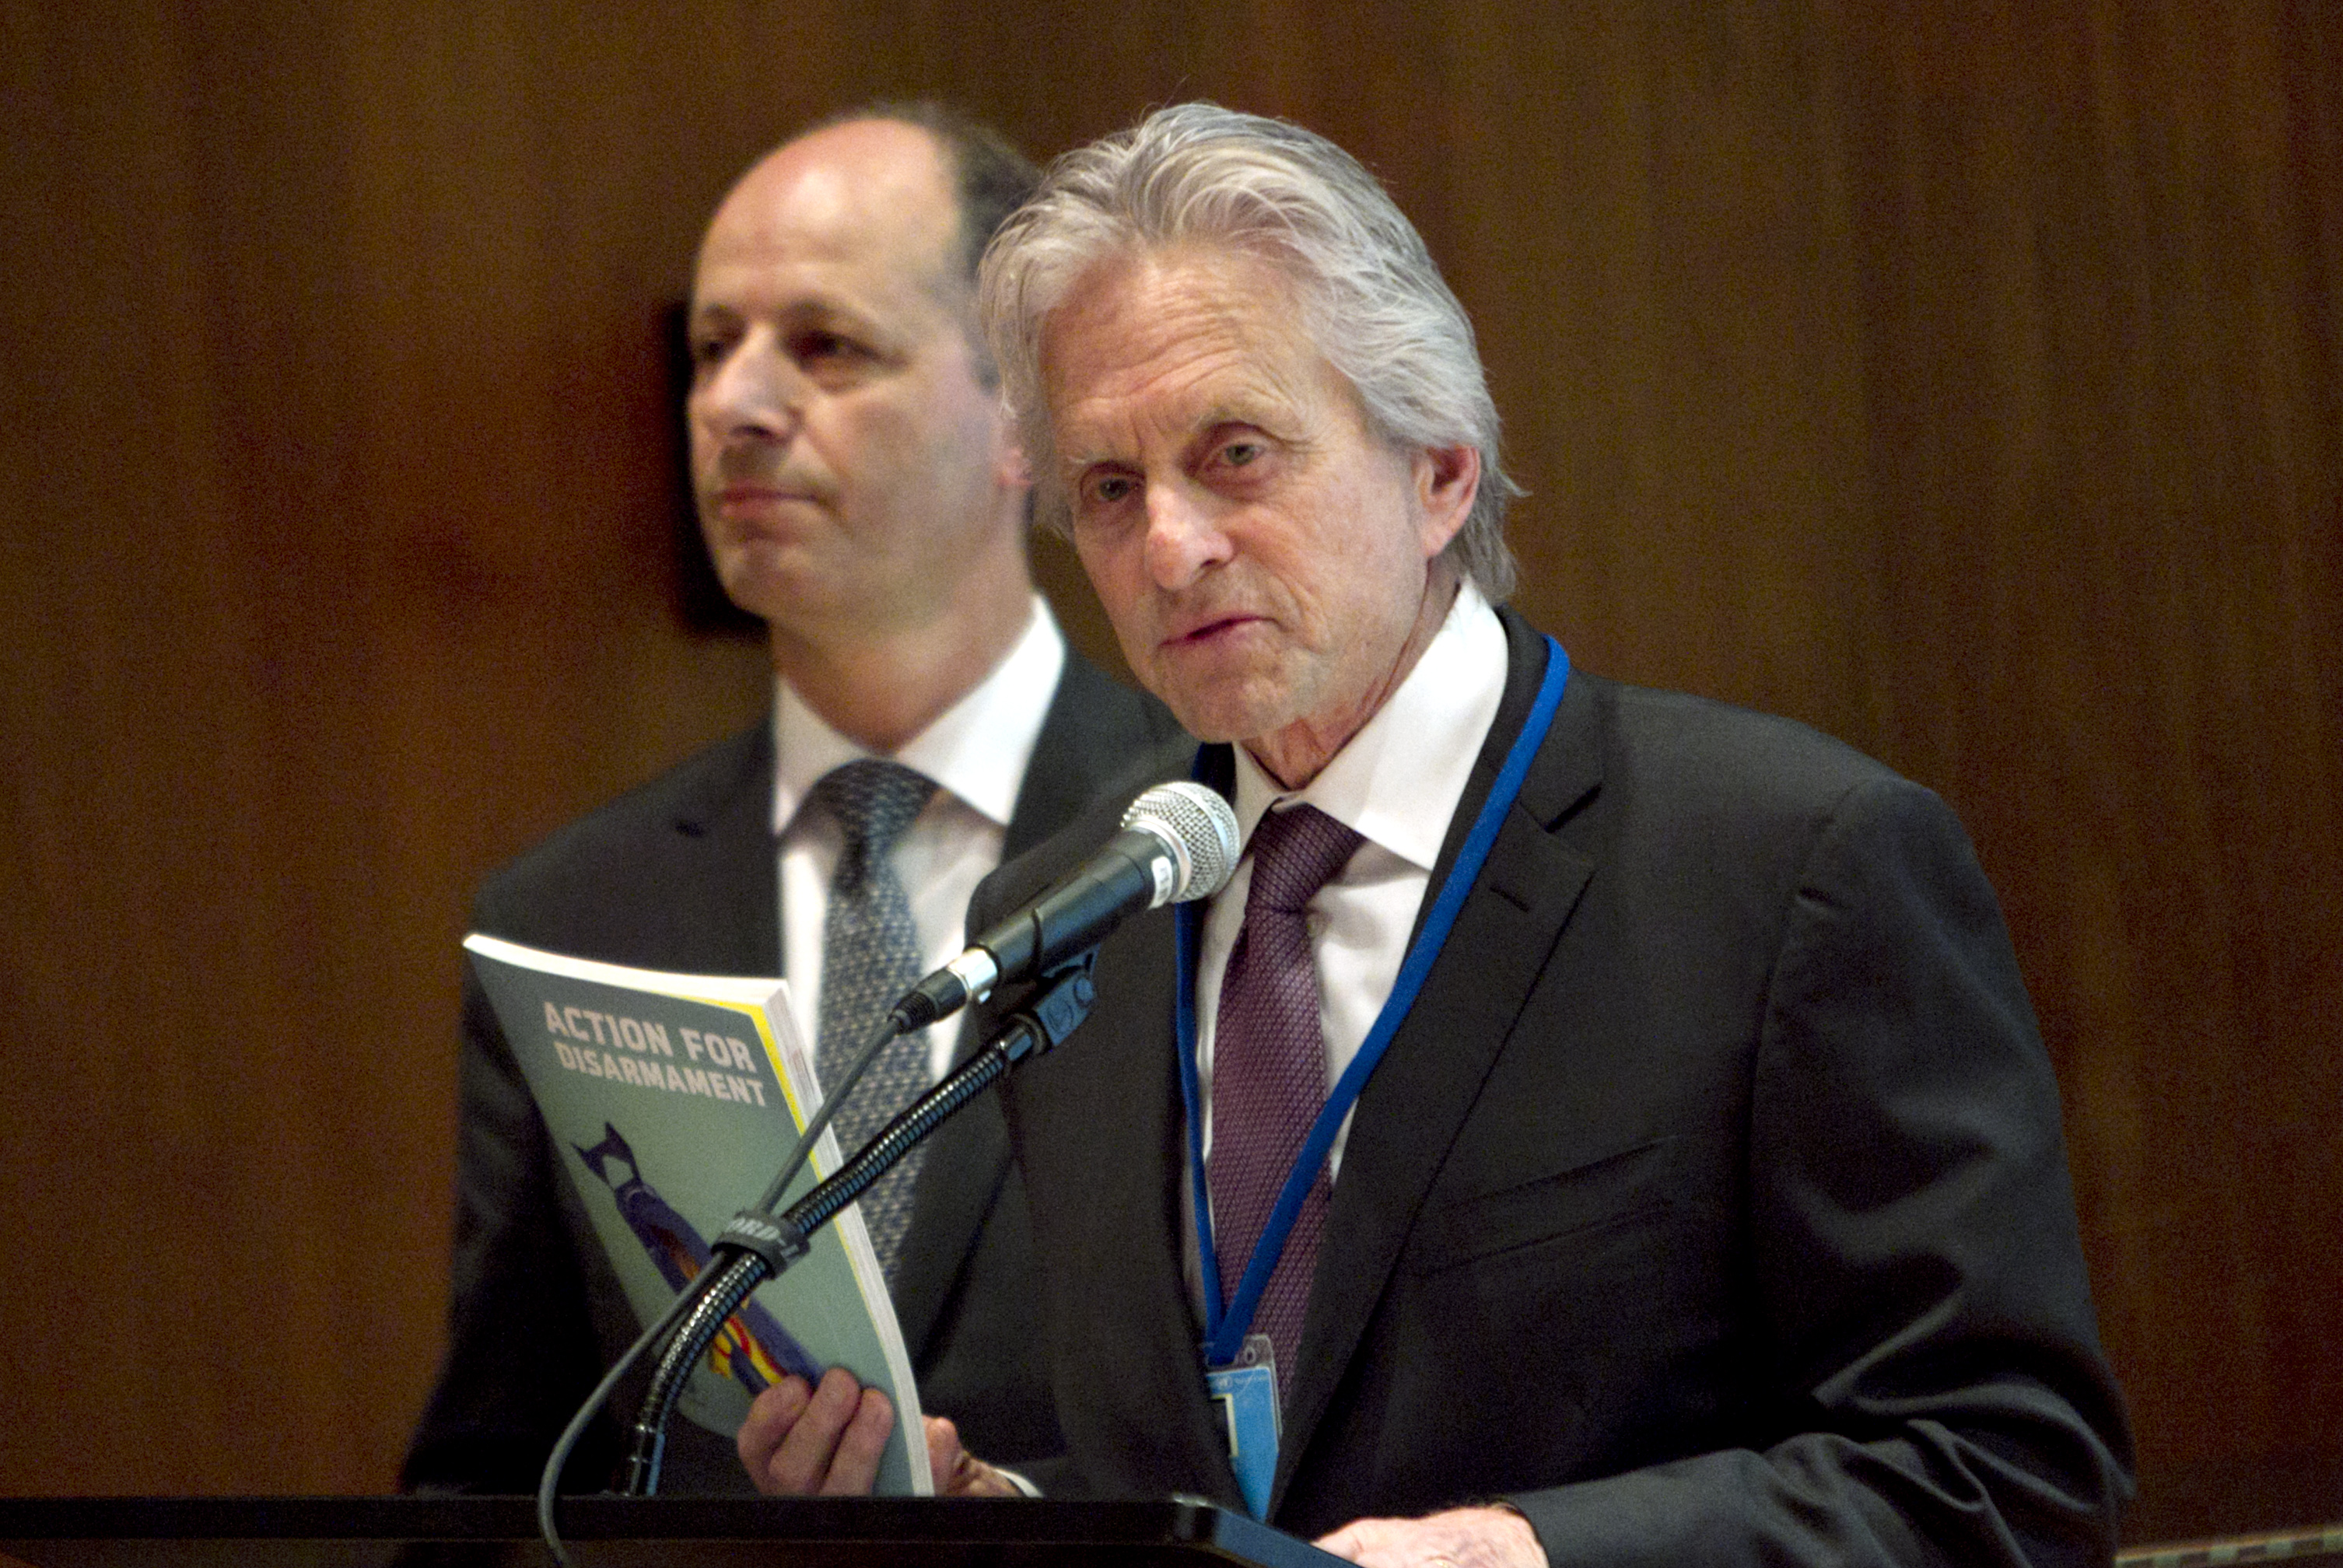 UN Messenger of Peace Michael Douglas speaks during a special event at UN headquarters to launch a book entitled, Action for Disarmament: 10 Things You Can Do!/UN Photo/Devra Berkowitz